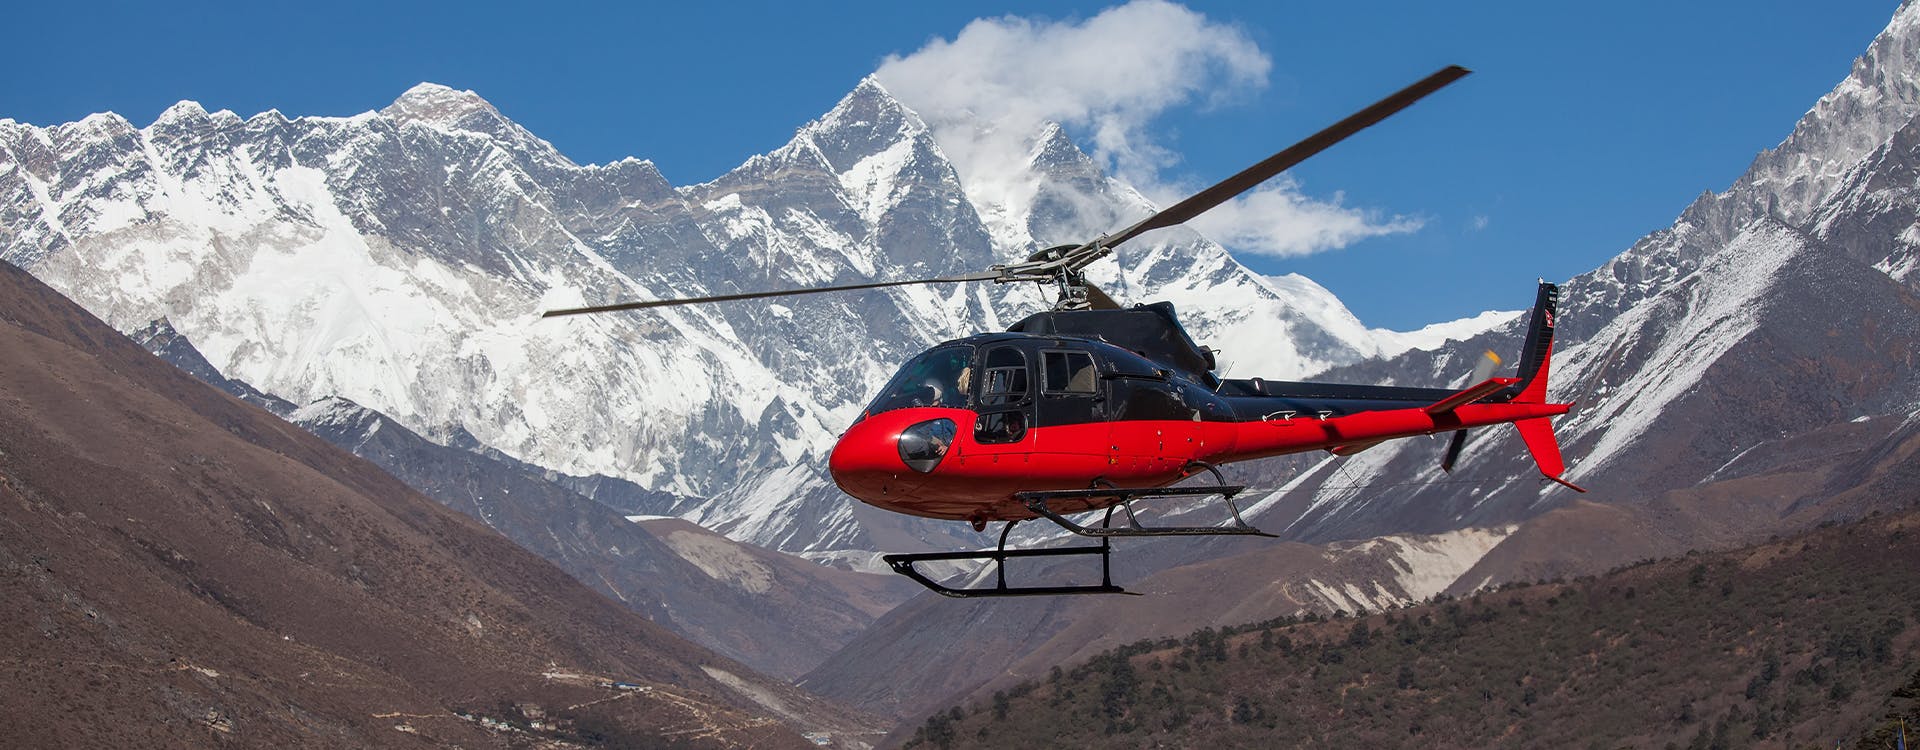 heli flying infront of snow capped mountain